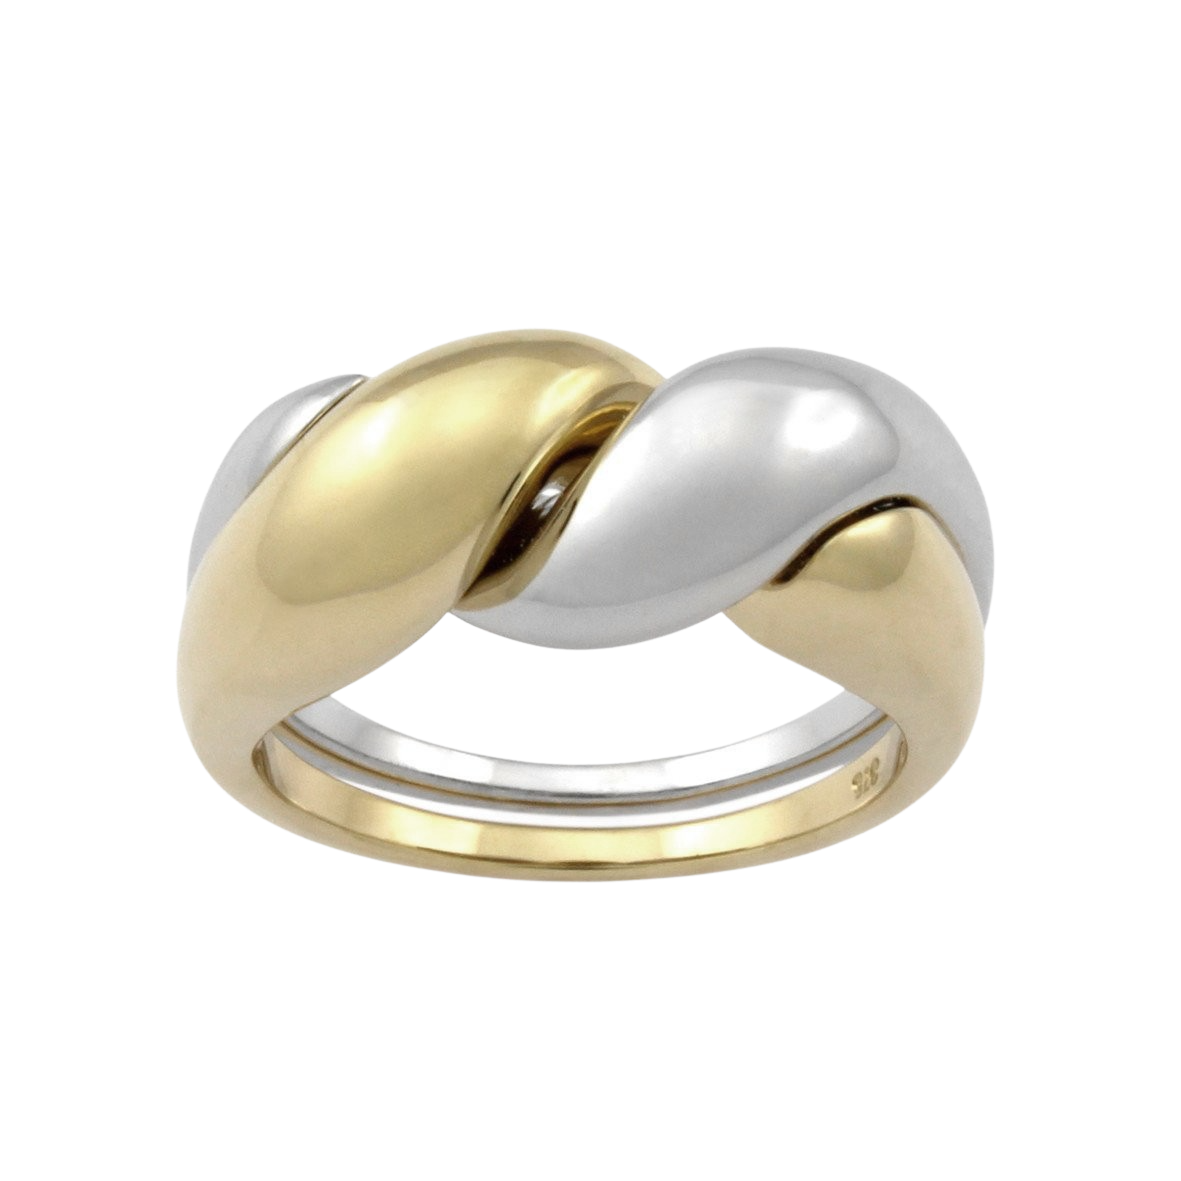 Two-tone Puzzle Ring. 9k Yellow Gold & Sterling Silver